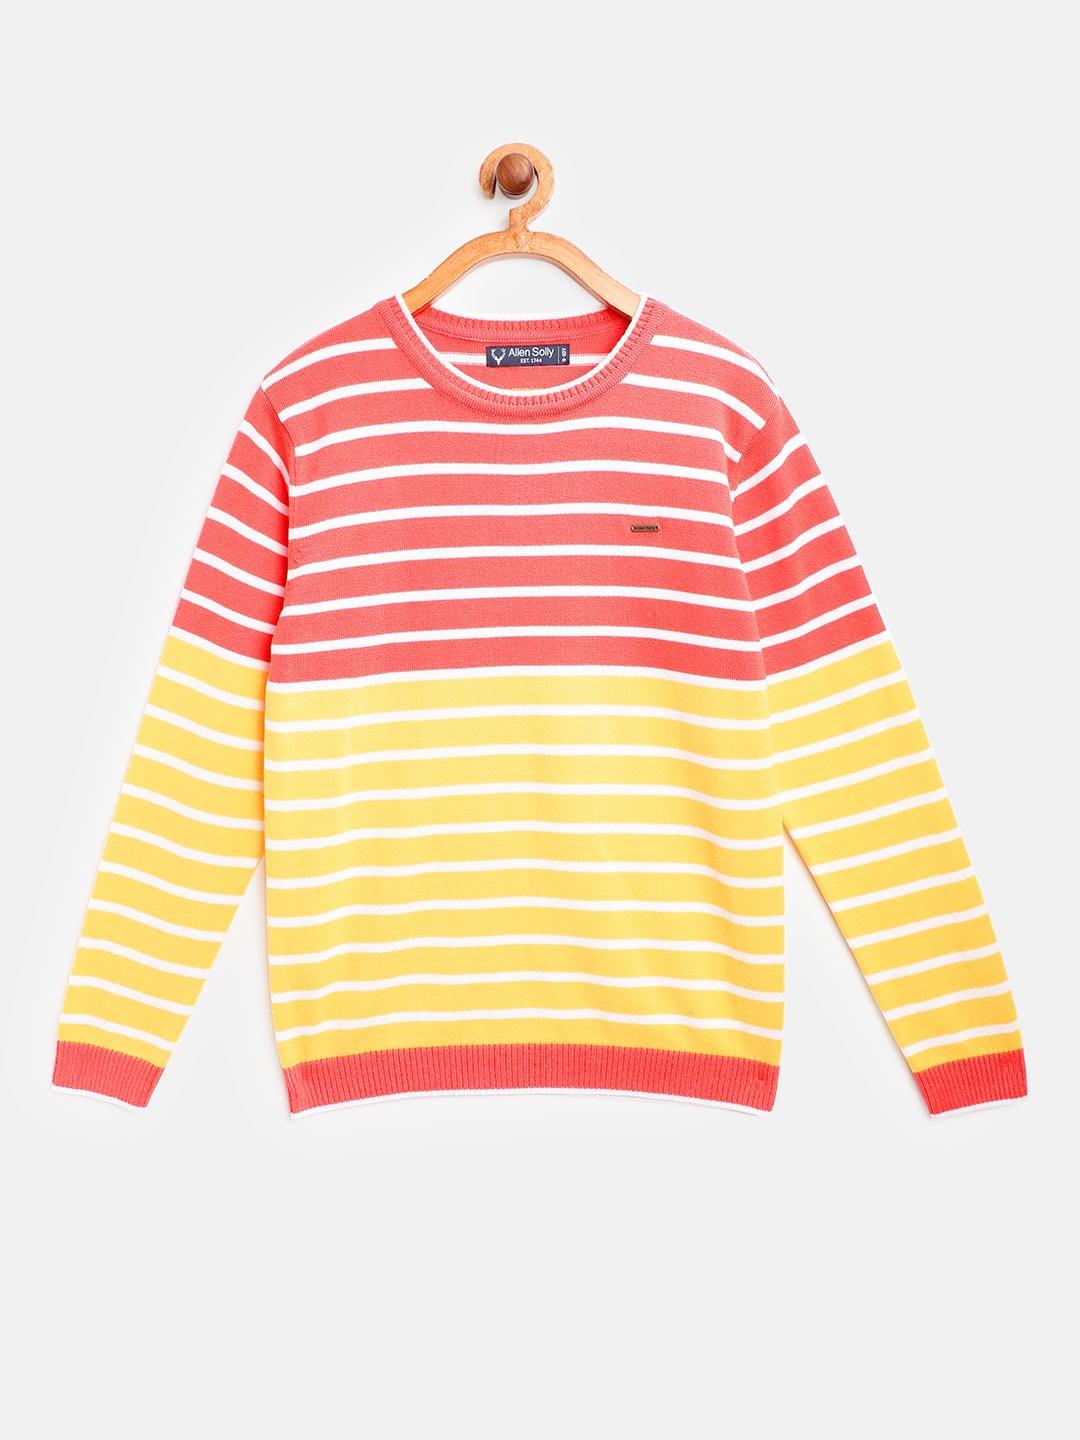 allen-solly-junior-boys-coral-pink-&-yellow-pure-cotton-striped-pullover